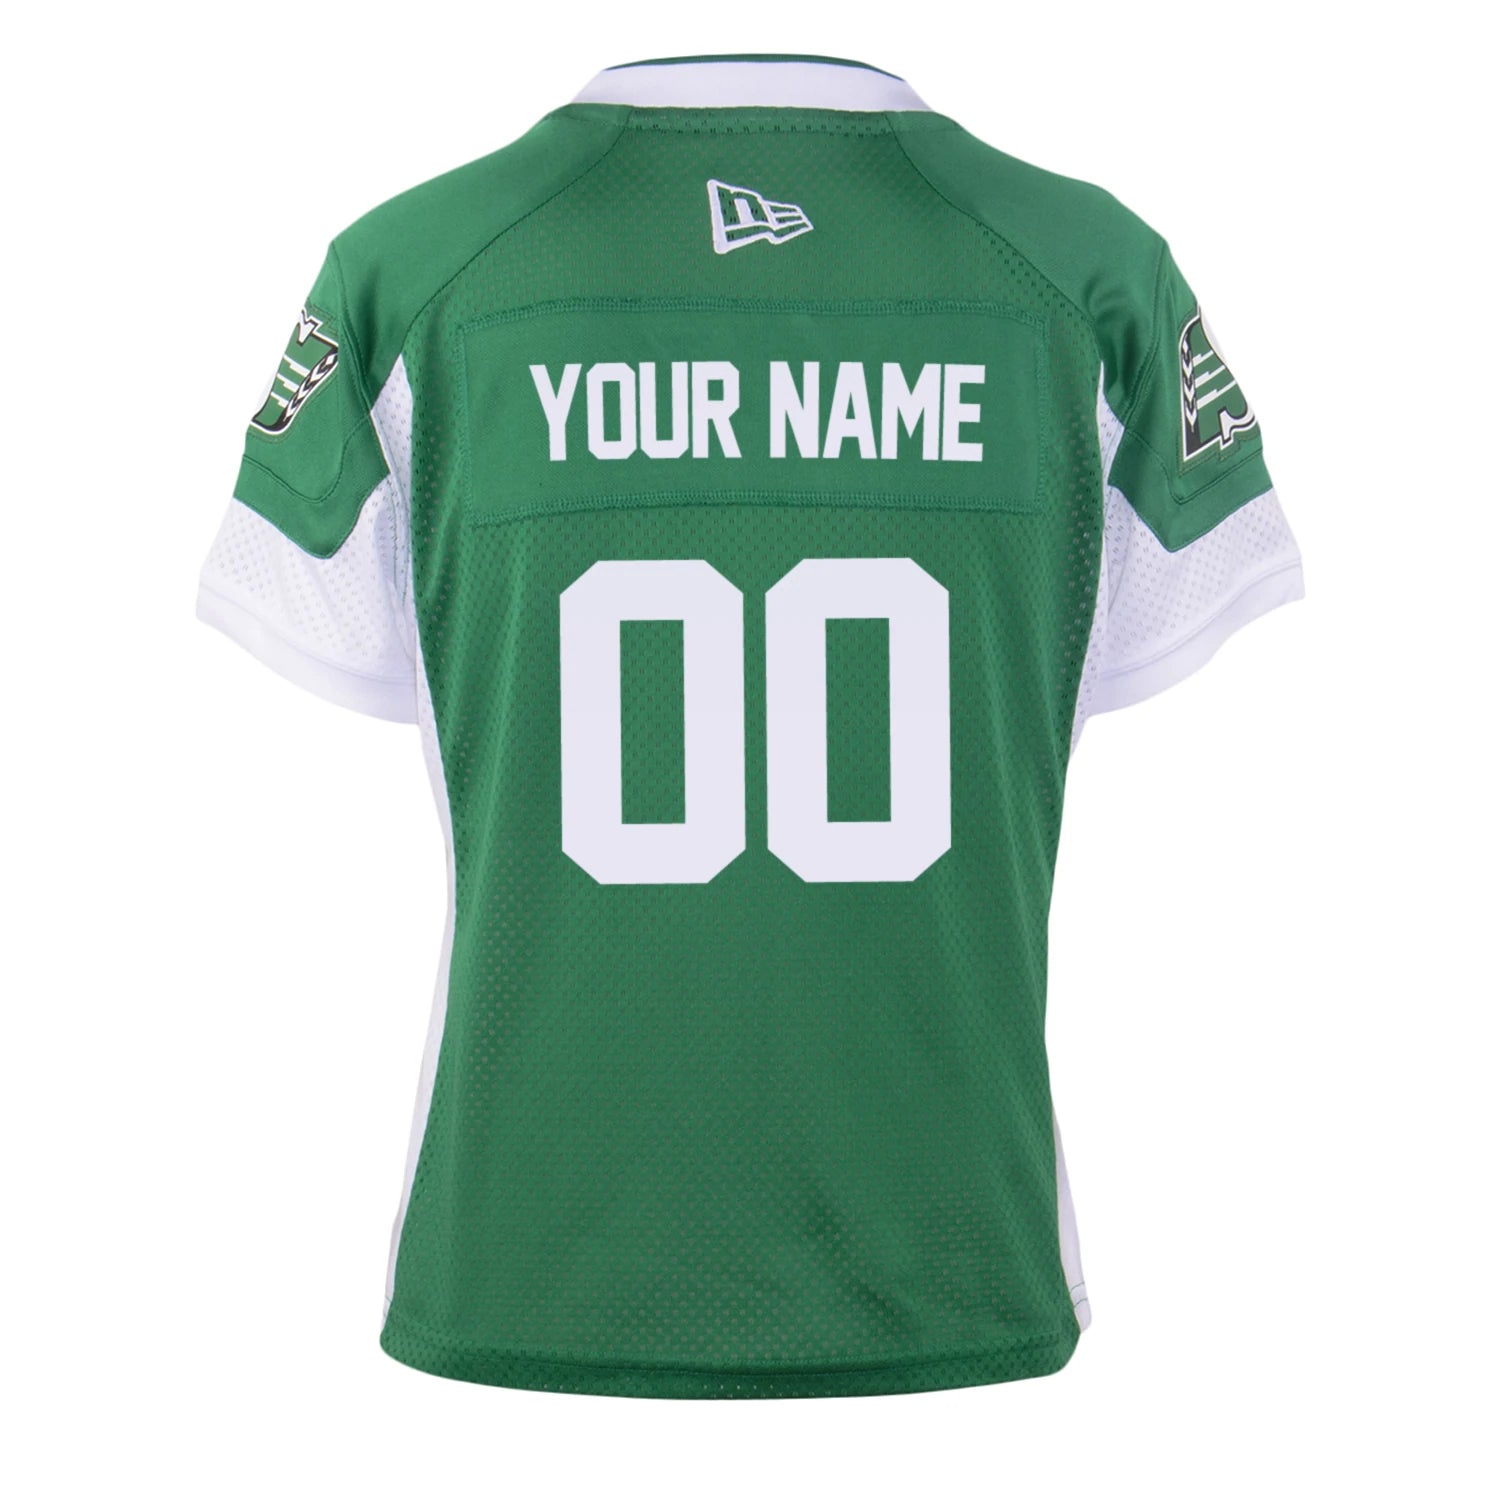 Ladies Customized Home Jersey